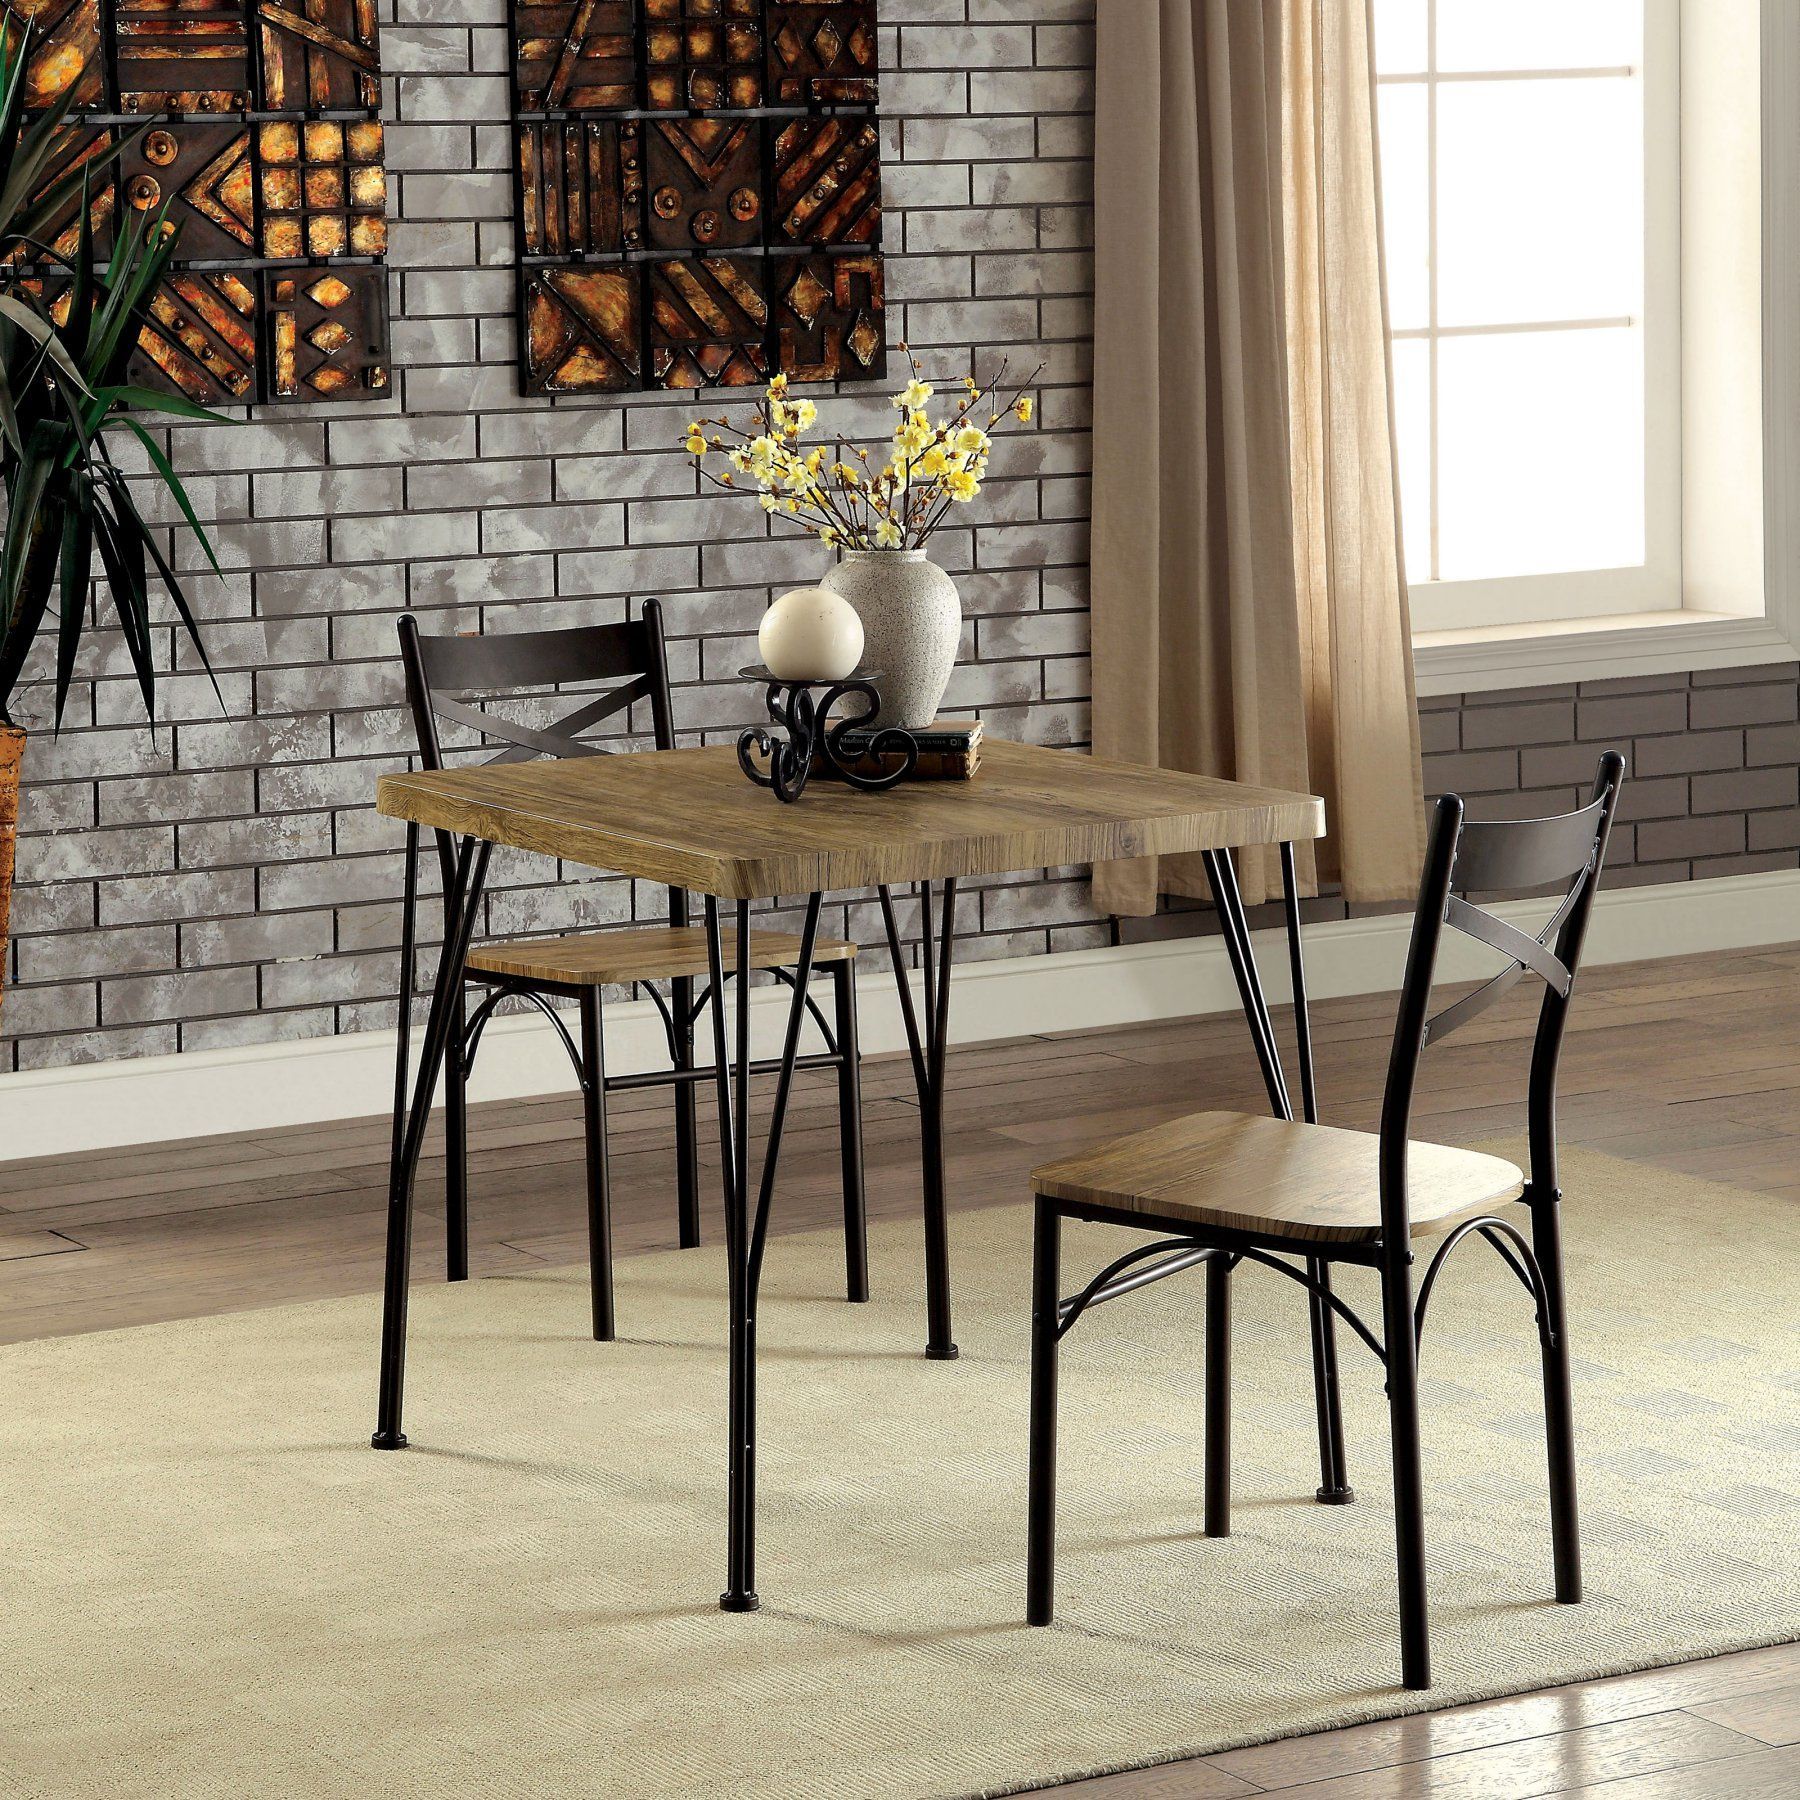 Furniture Of America Amonica Industrial Style 3 Piece Casual Dining Regarding Most Up To Date Bearden 3 Piece Dining Sets (View 7 of 20)